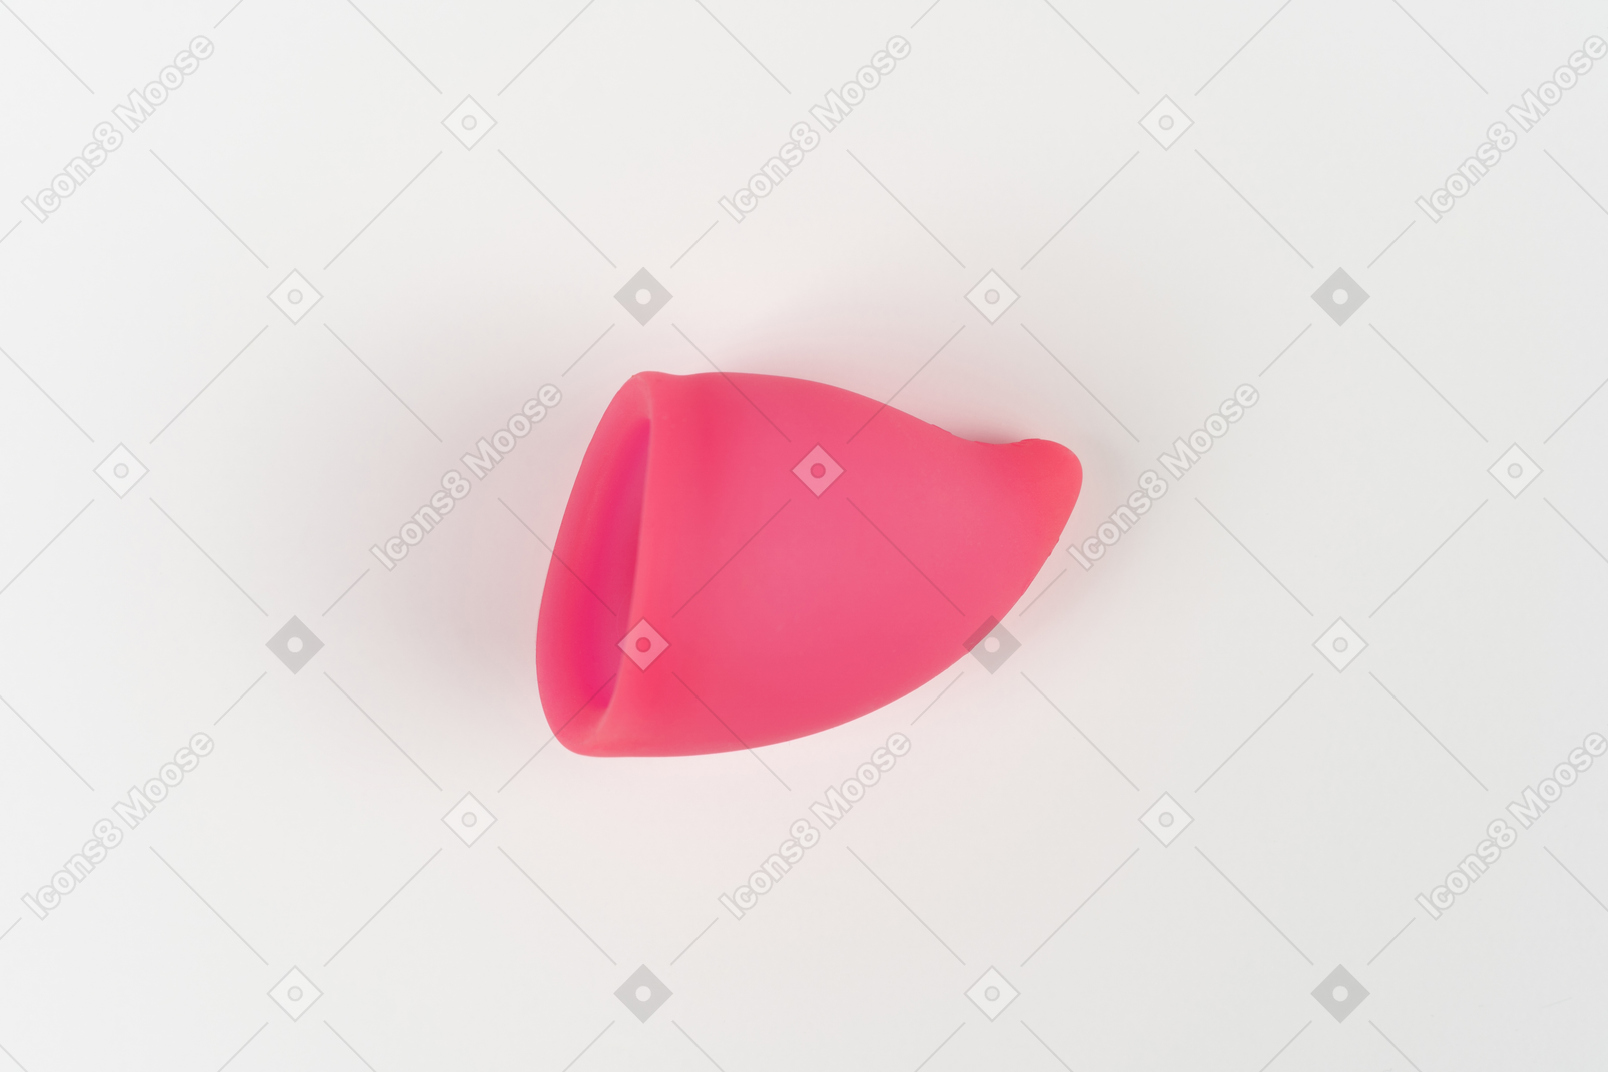 Close up of a pink menstrual cup